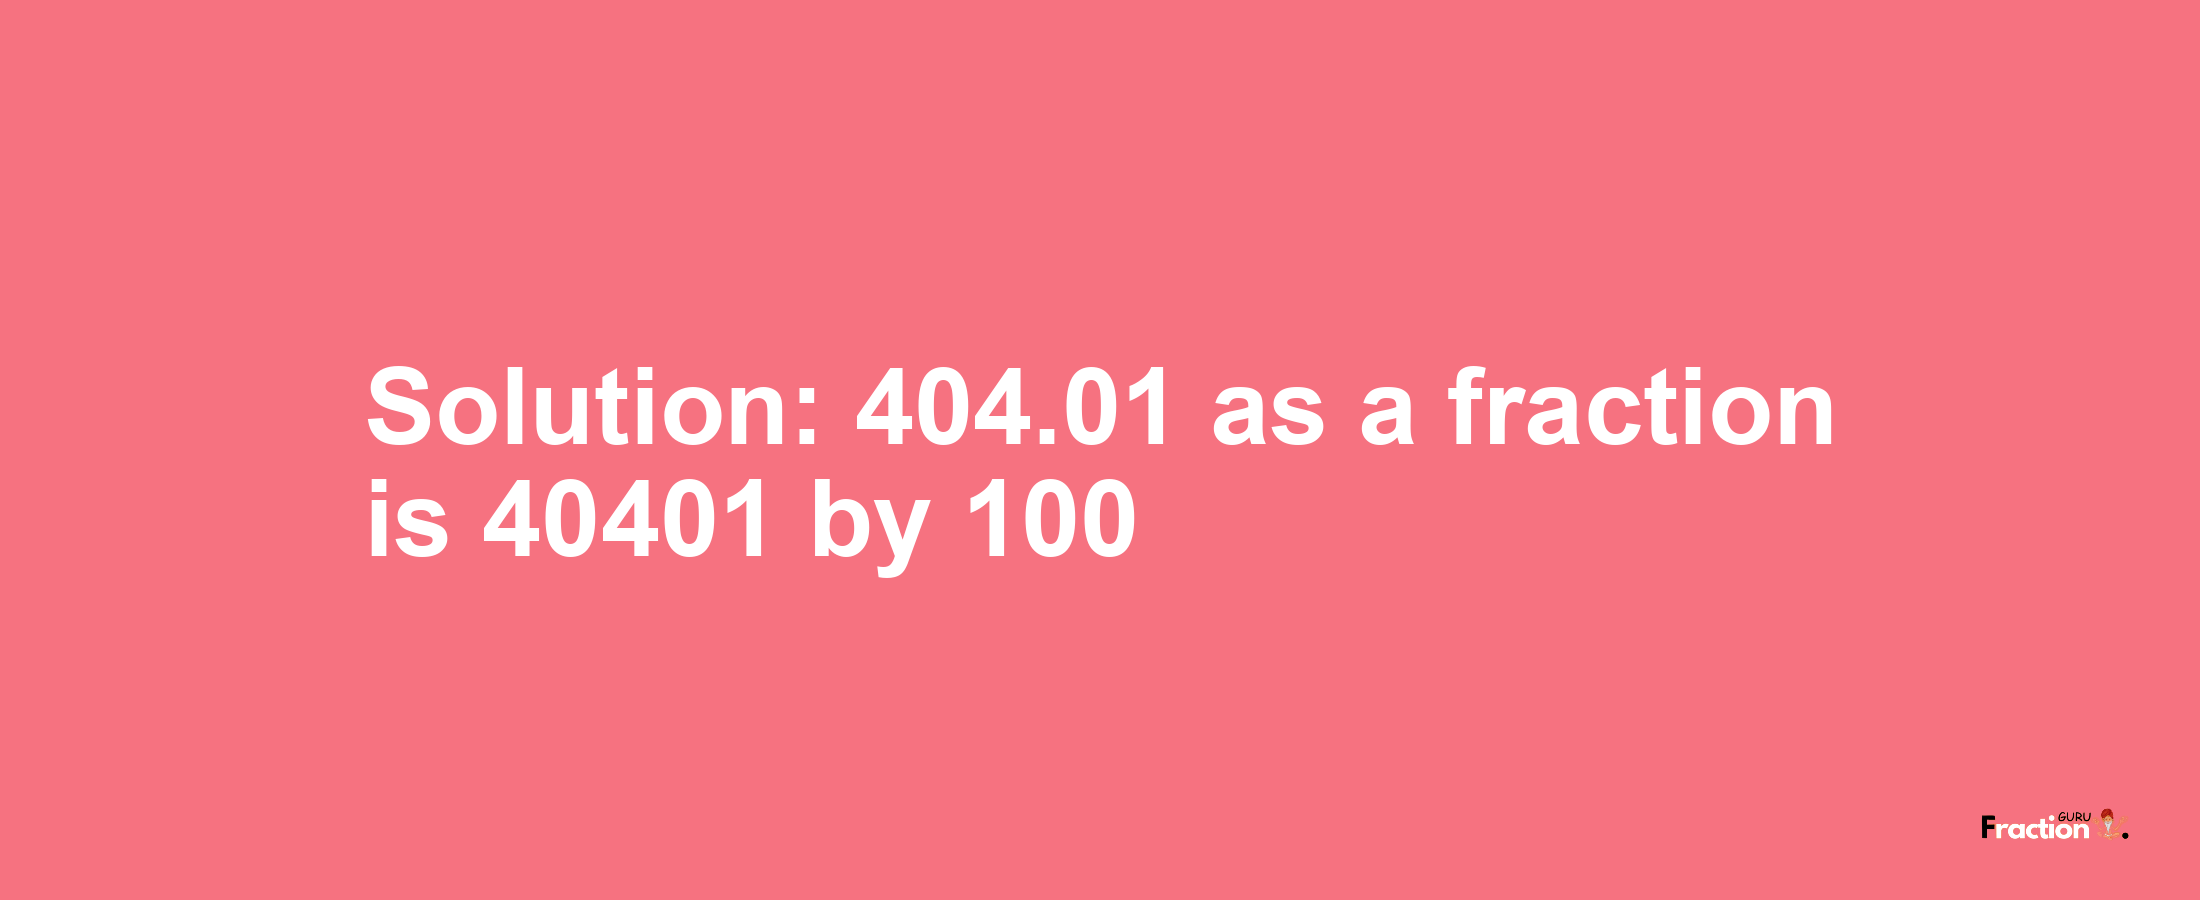 Solution:404.01 as a fraction is 40401/100